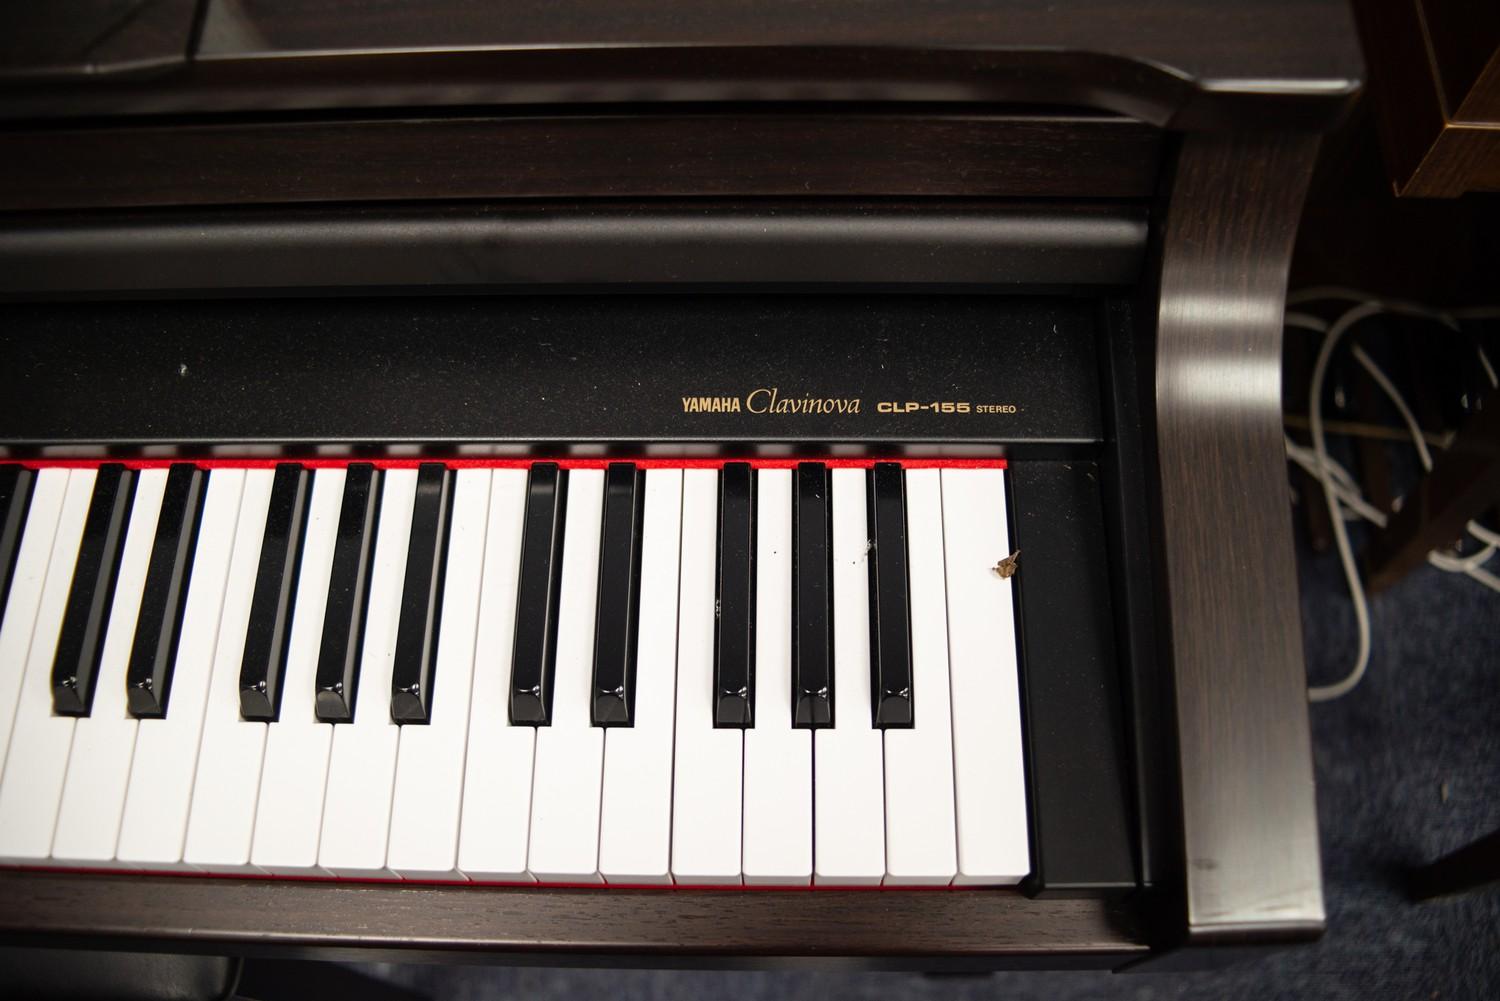 YAMAHA 'CLAVINOVA' SEVEN OCTAVE KEYBOARD, MODEL CLF-155 STEREO WITH METRONOME AND REVERB MULTI-MID - Image 6 of 7